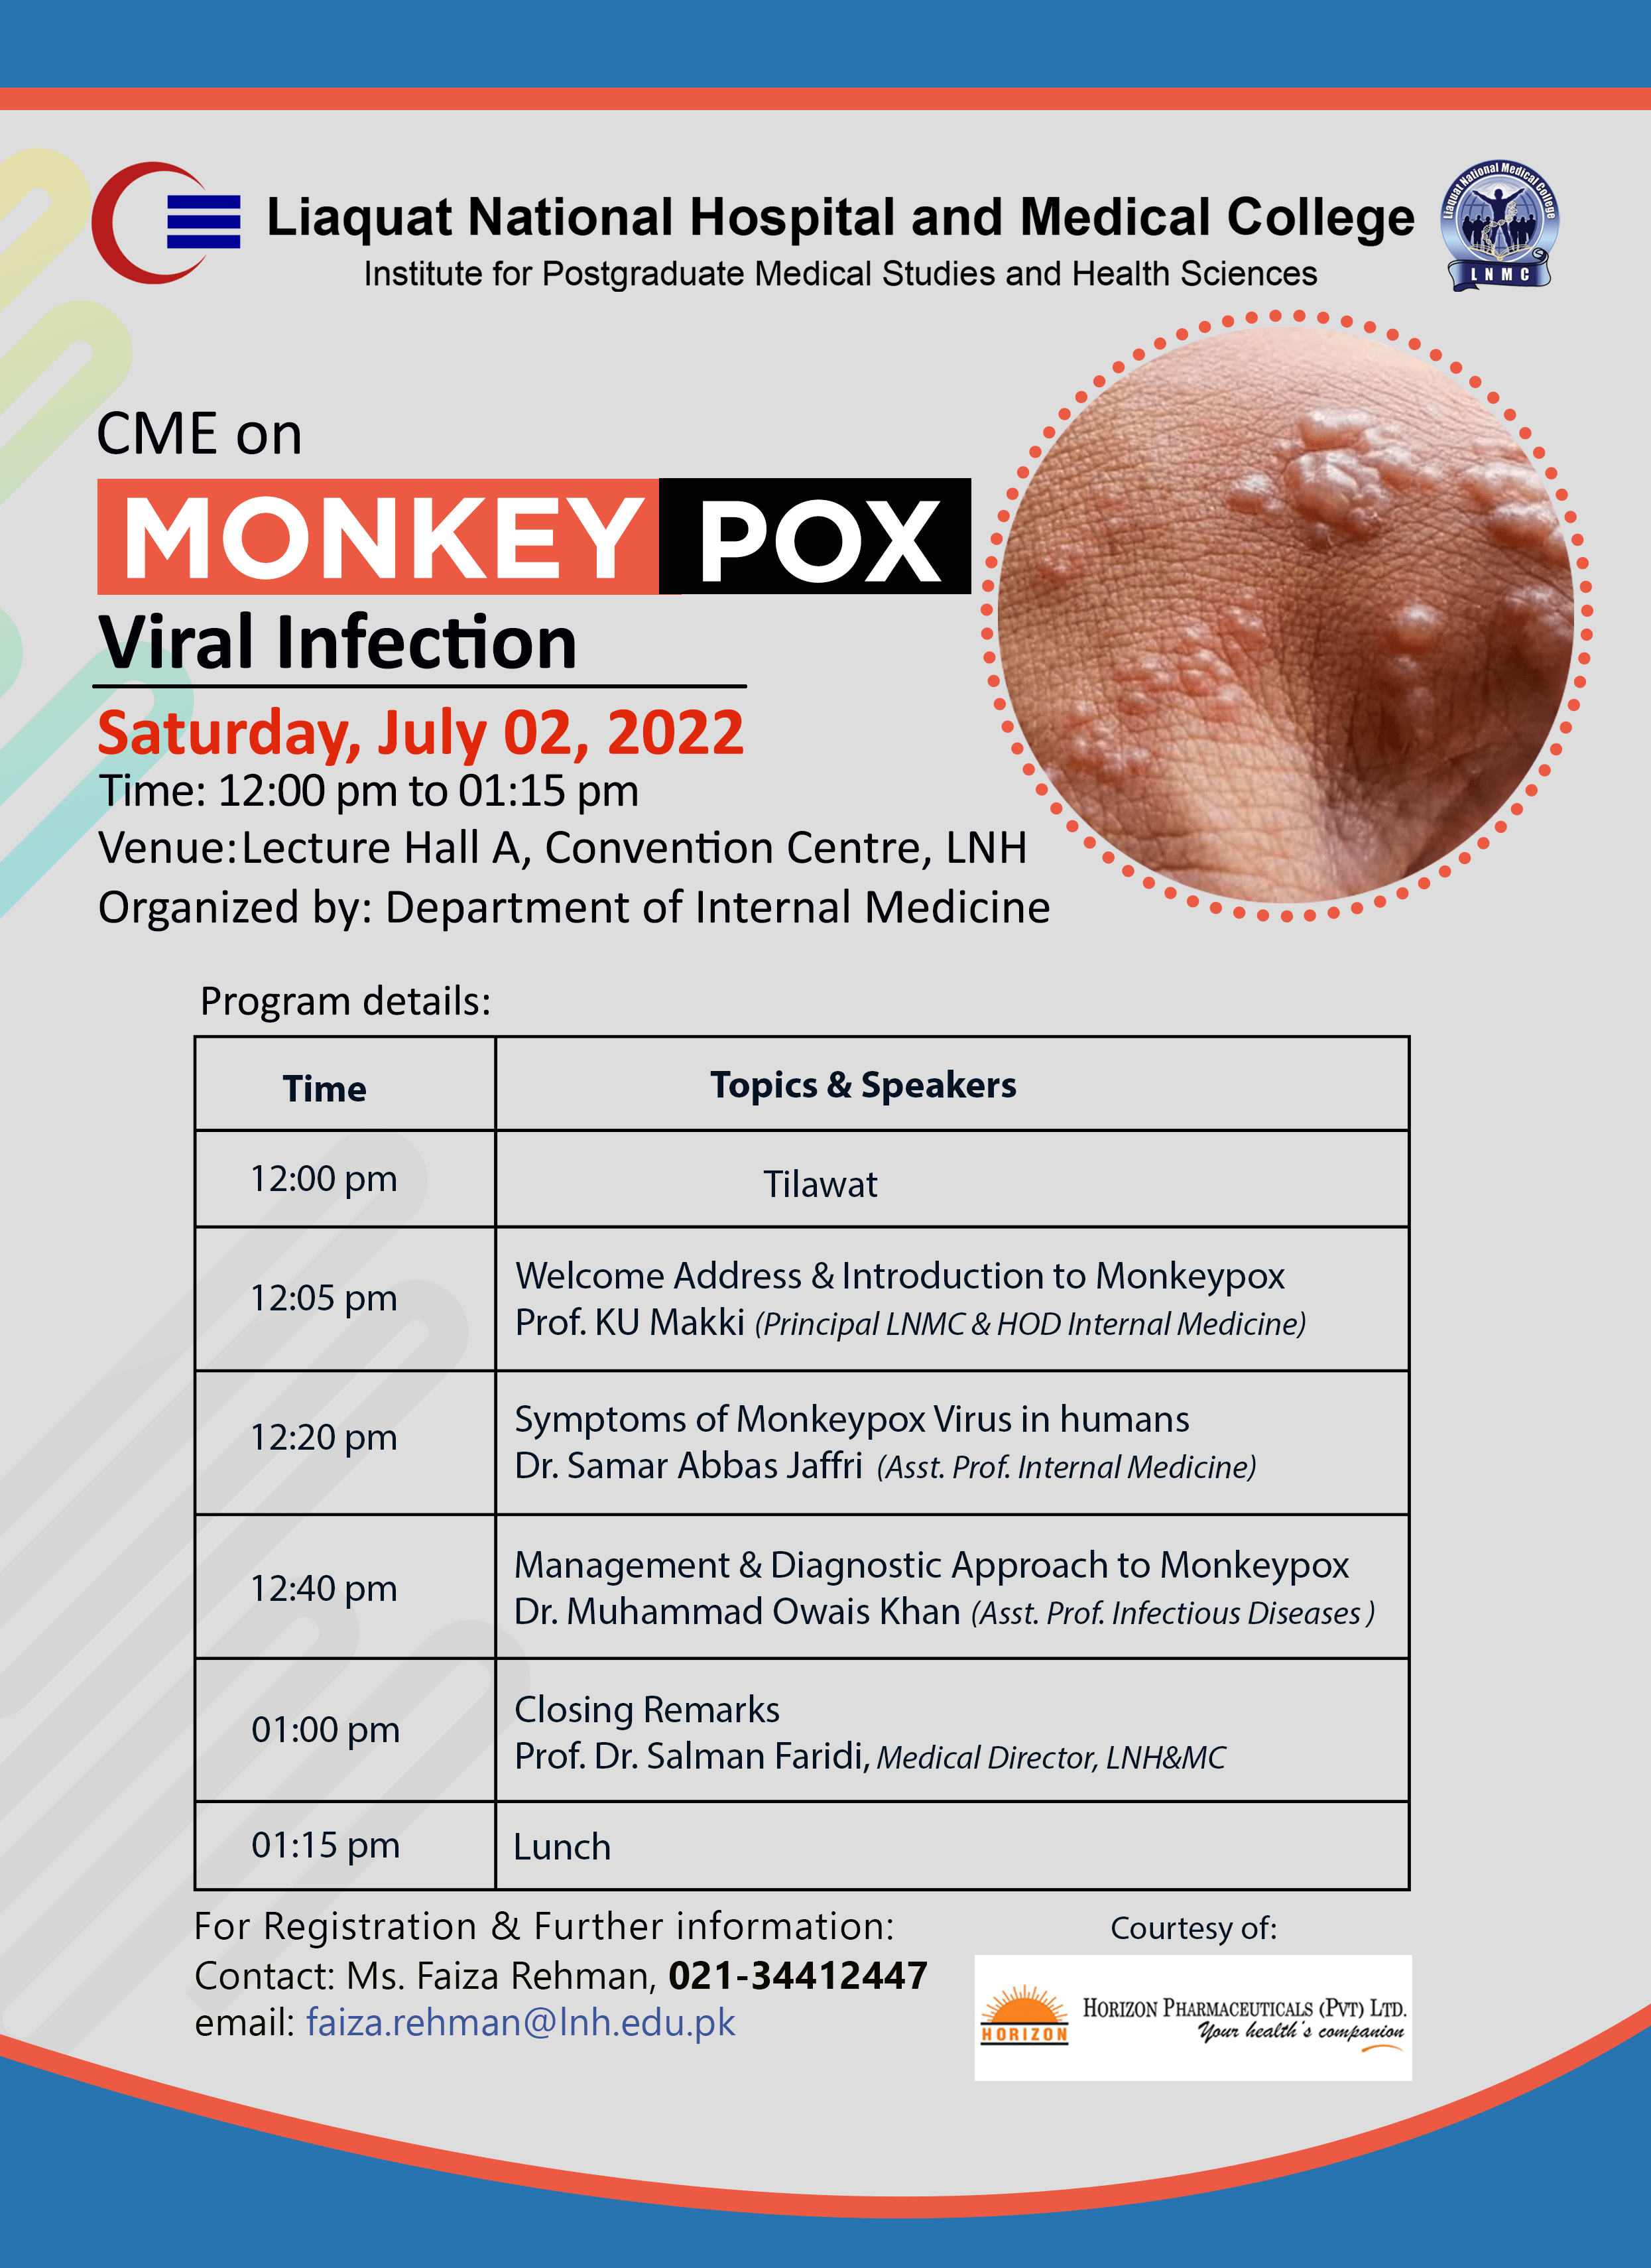 CME on Monkeypox Viral Infection